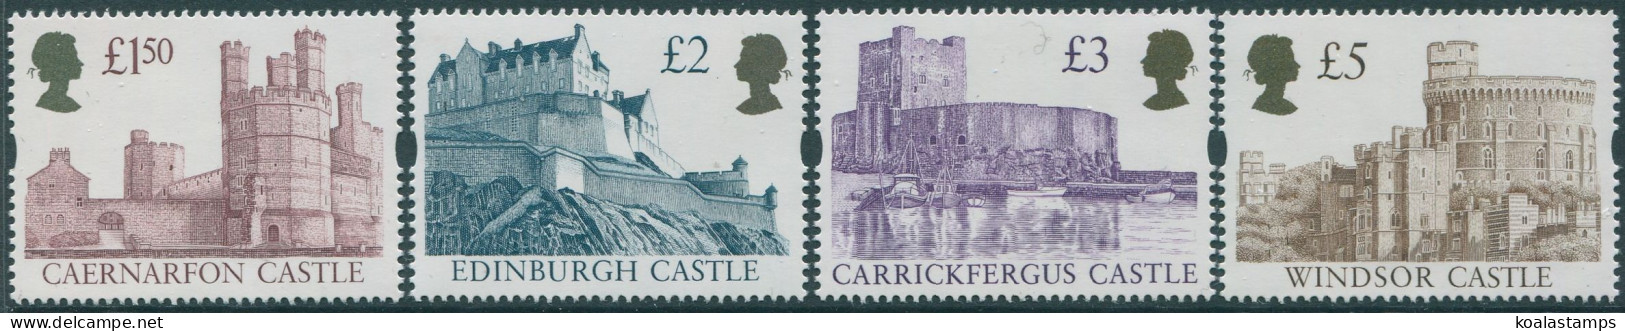 Great Britain 1992 SG1612-1614 Castles (4) MNH - Unclassified